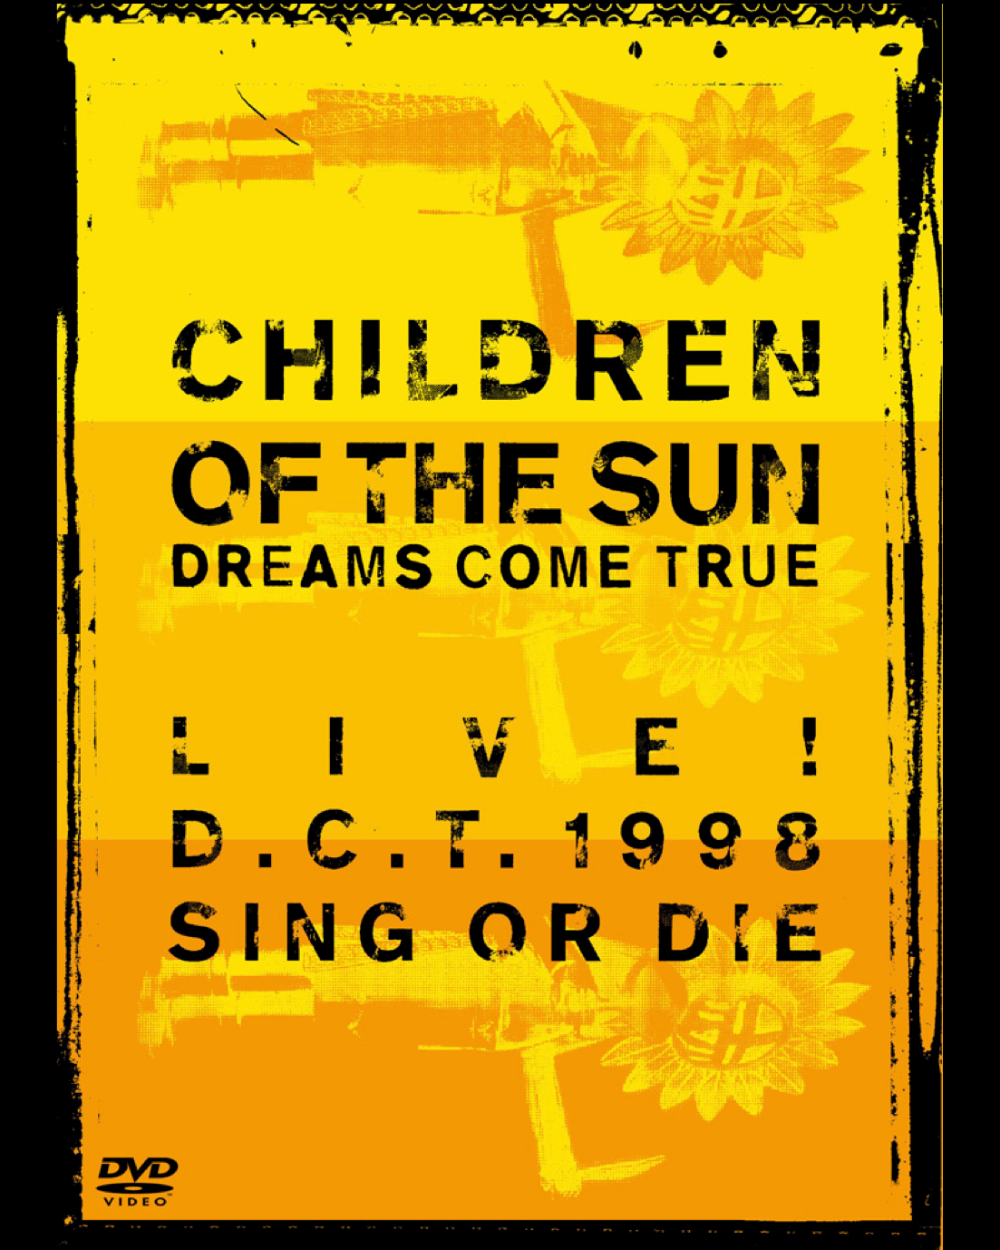 DREAMS COME TRUE【DVD】CHILDREN OF THE SUN LIVE！D.C.T.1998 SING OR DIE